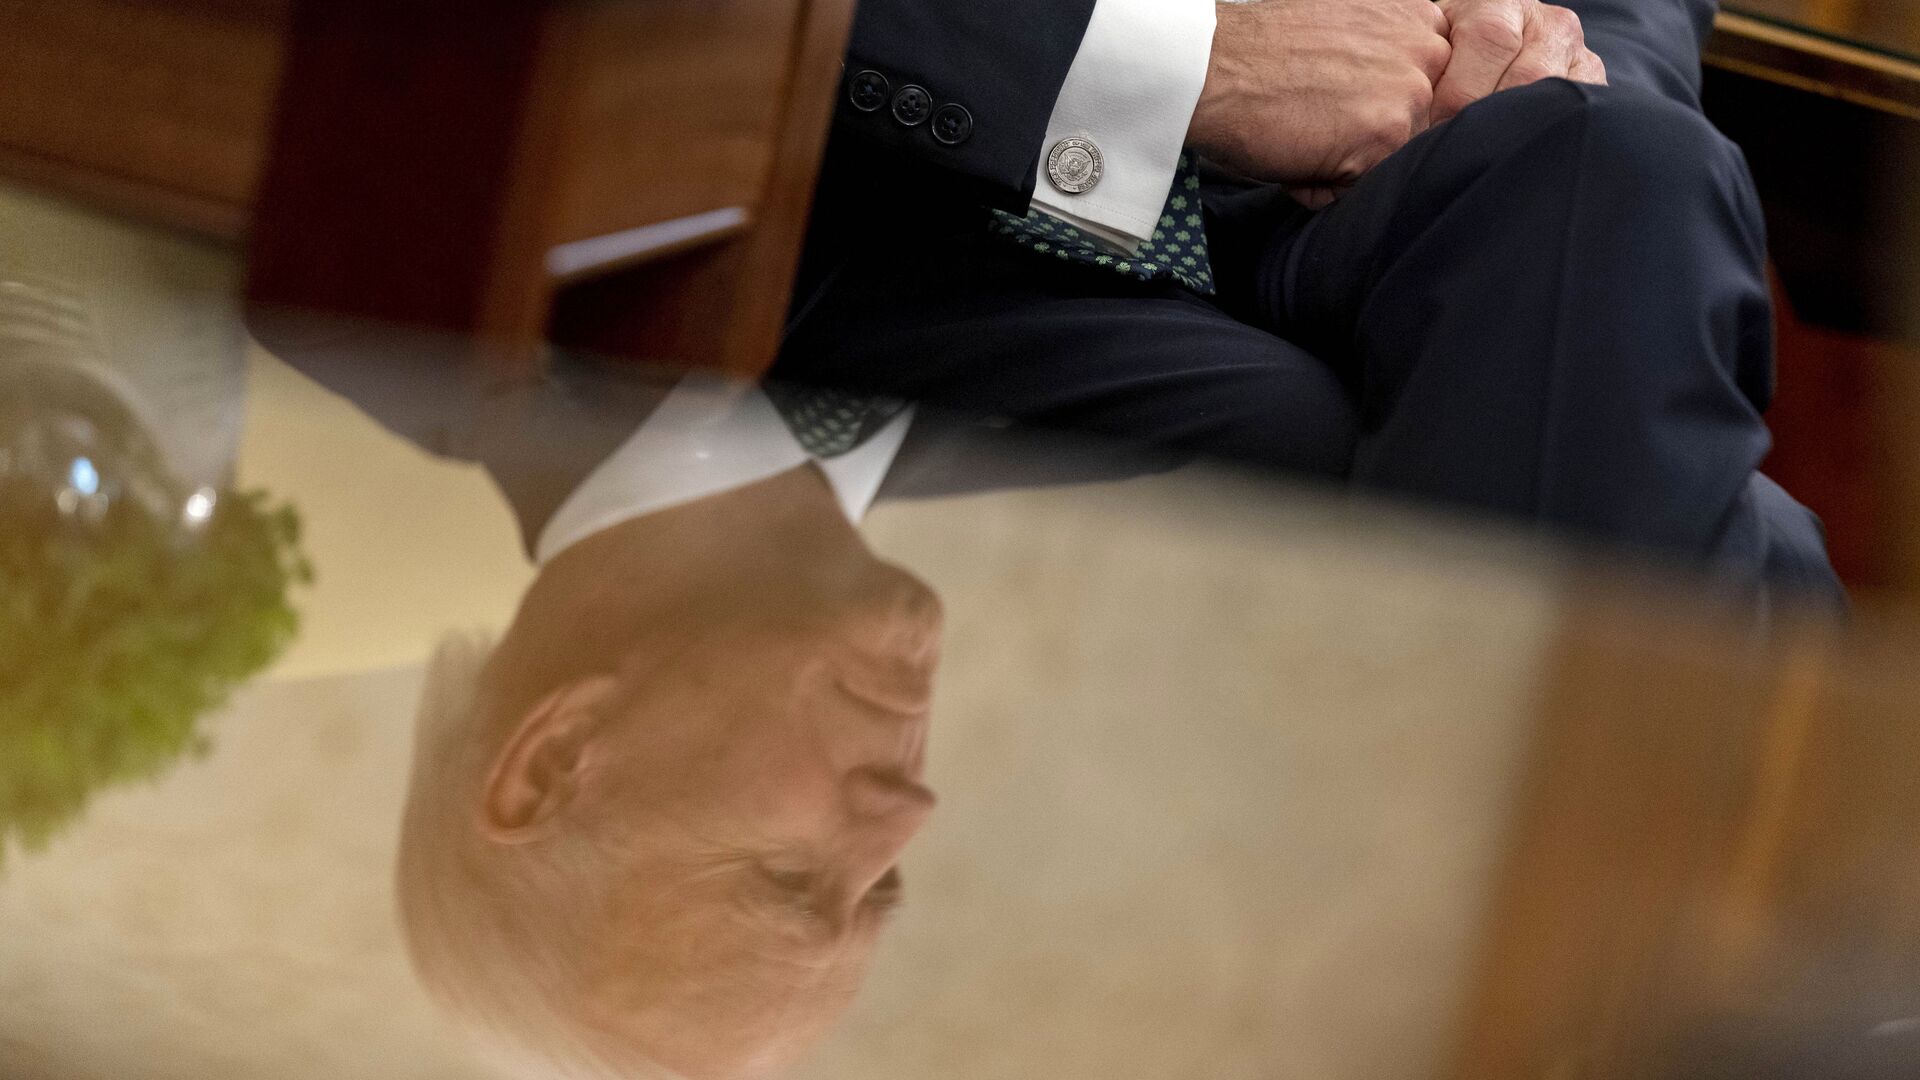 President Joe Biden, seen in reflection, sits next to a bowl of Irish shamrocks, left, as he has a virtual meeting with Ireland's Prime Minister Micheal Martin on St. Patrick's Day, in the Oval Office of the White House, Wednesday, March 17, 2021, in Washington.  - Sputnik International, 1920, 12.02.2022